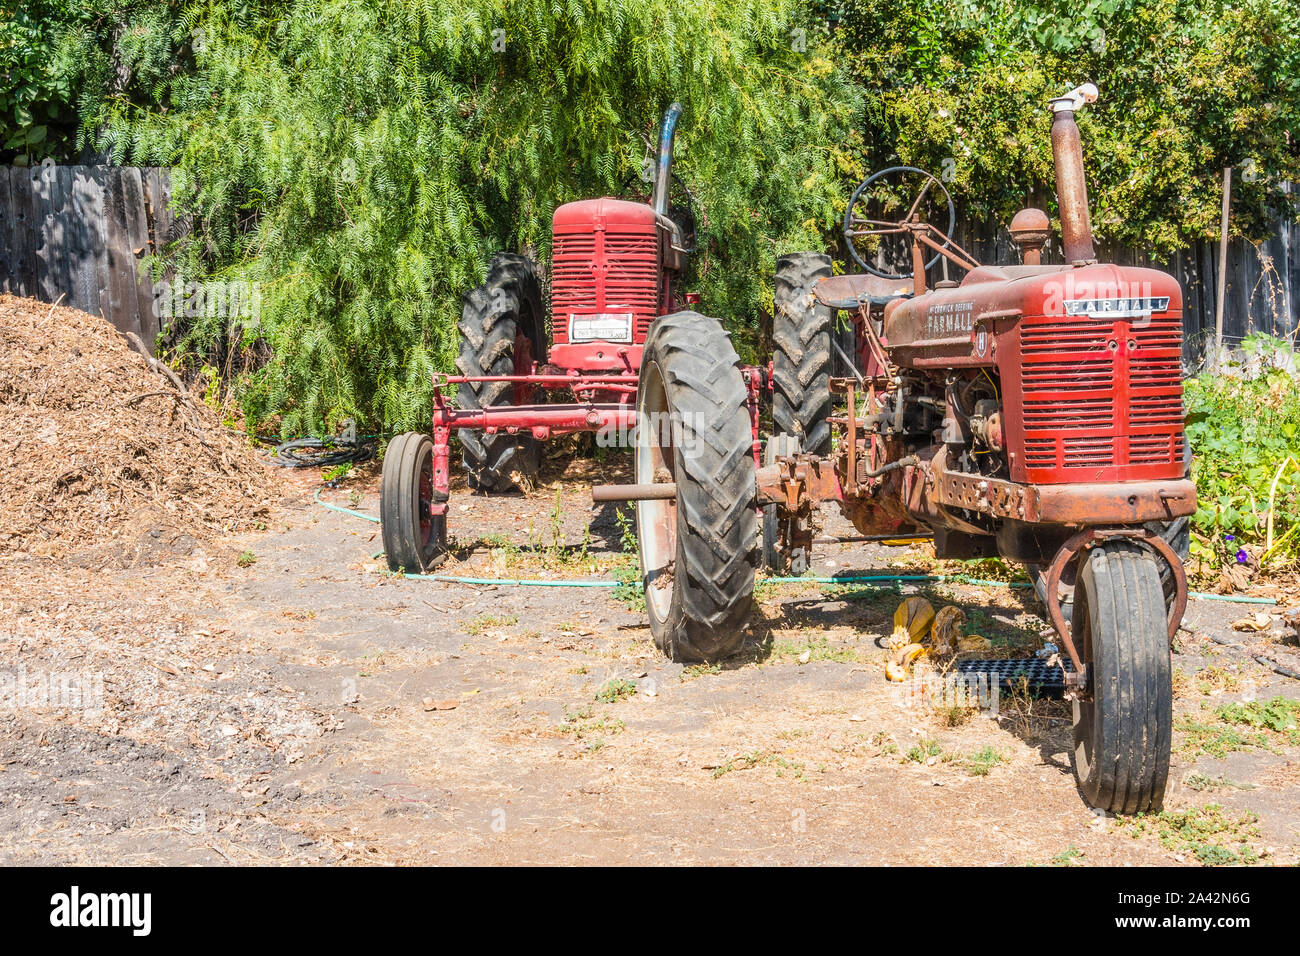 Two old red tractors parked in Los Olivos, California. Stock Photo